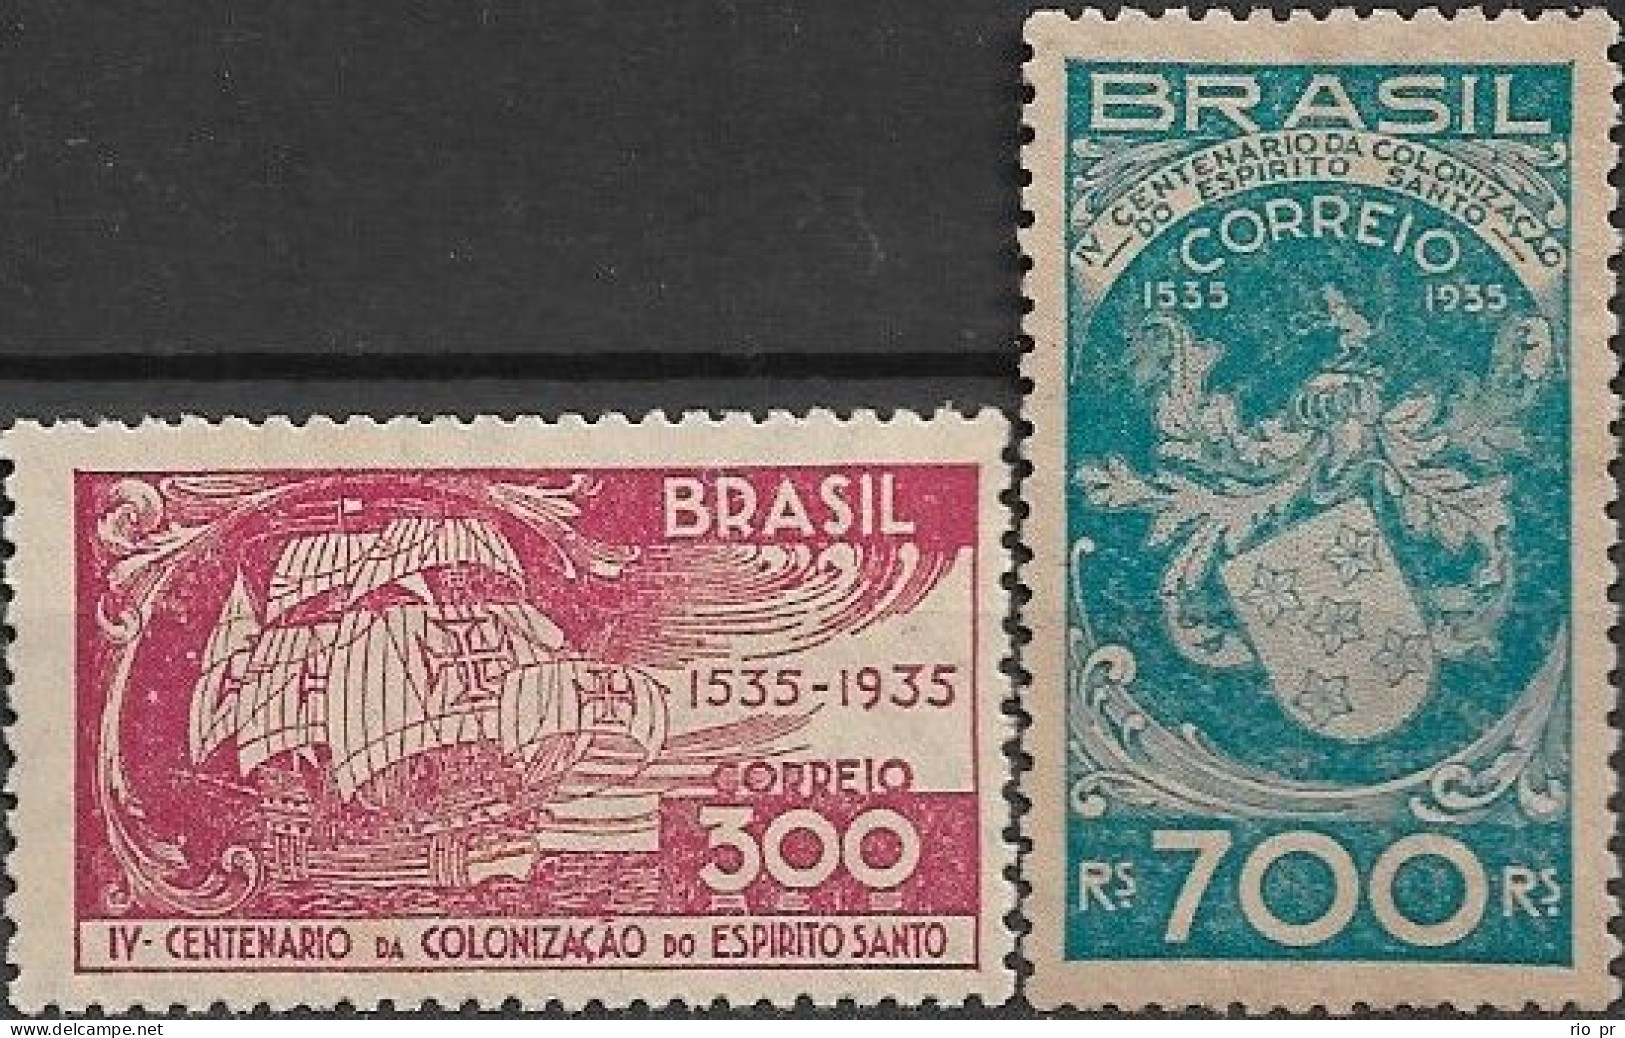 BRAZIL - COMPLETE SET 4th CENTENARY OF THE COLONIZATION OF ESPÍRITO ANTO STATE 1935 - MNH/NEW NO GUM - Unused Stamps